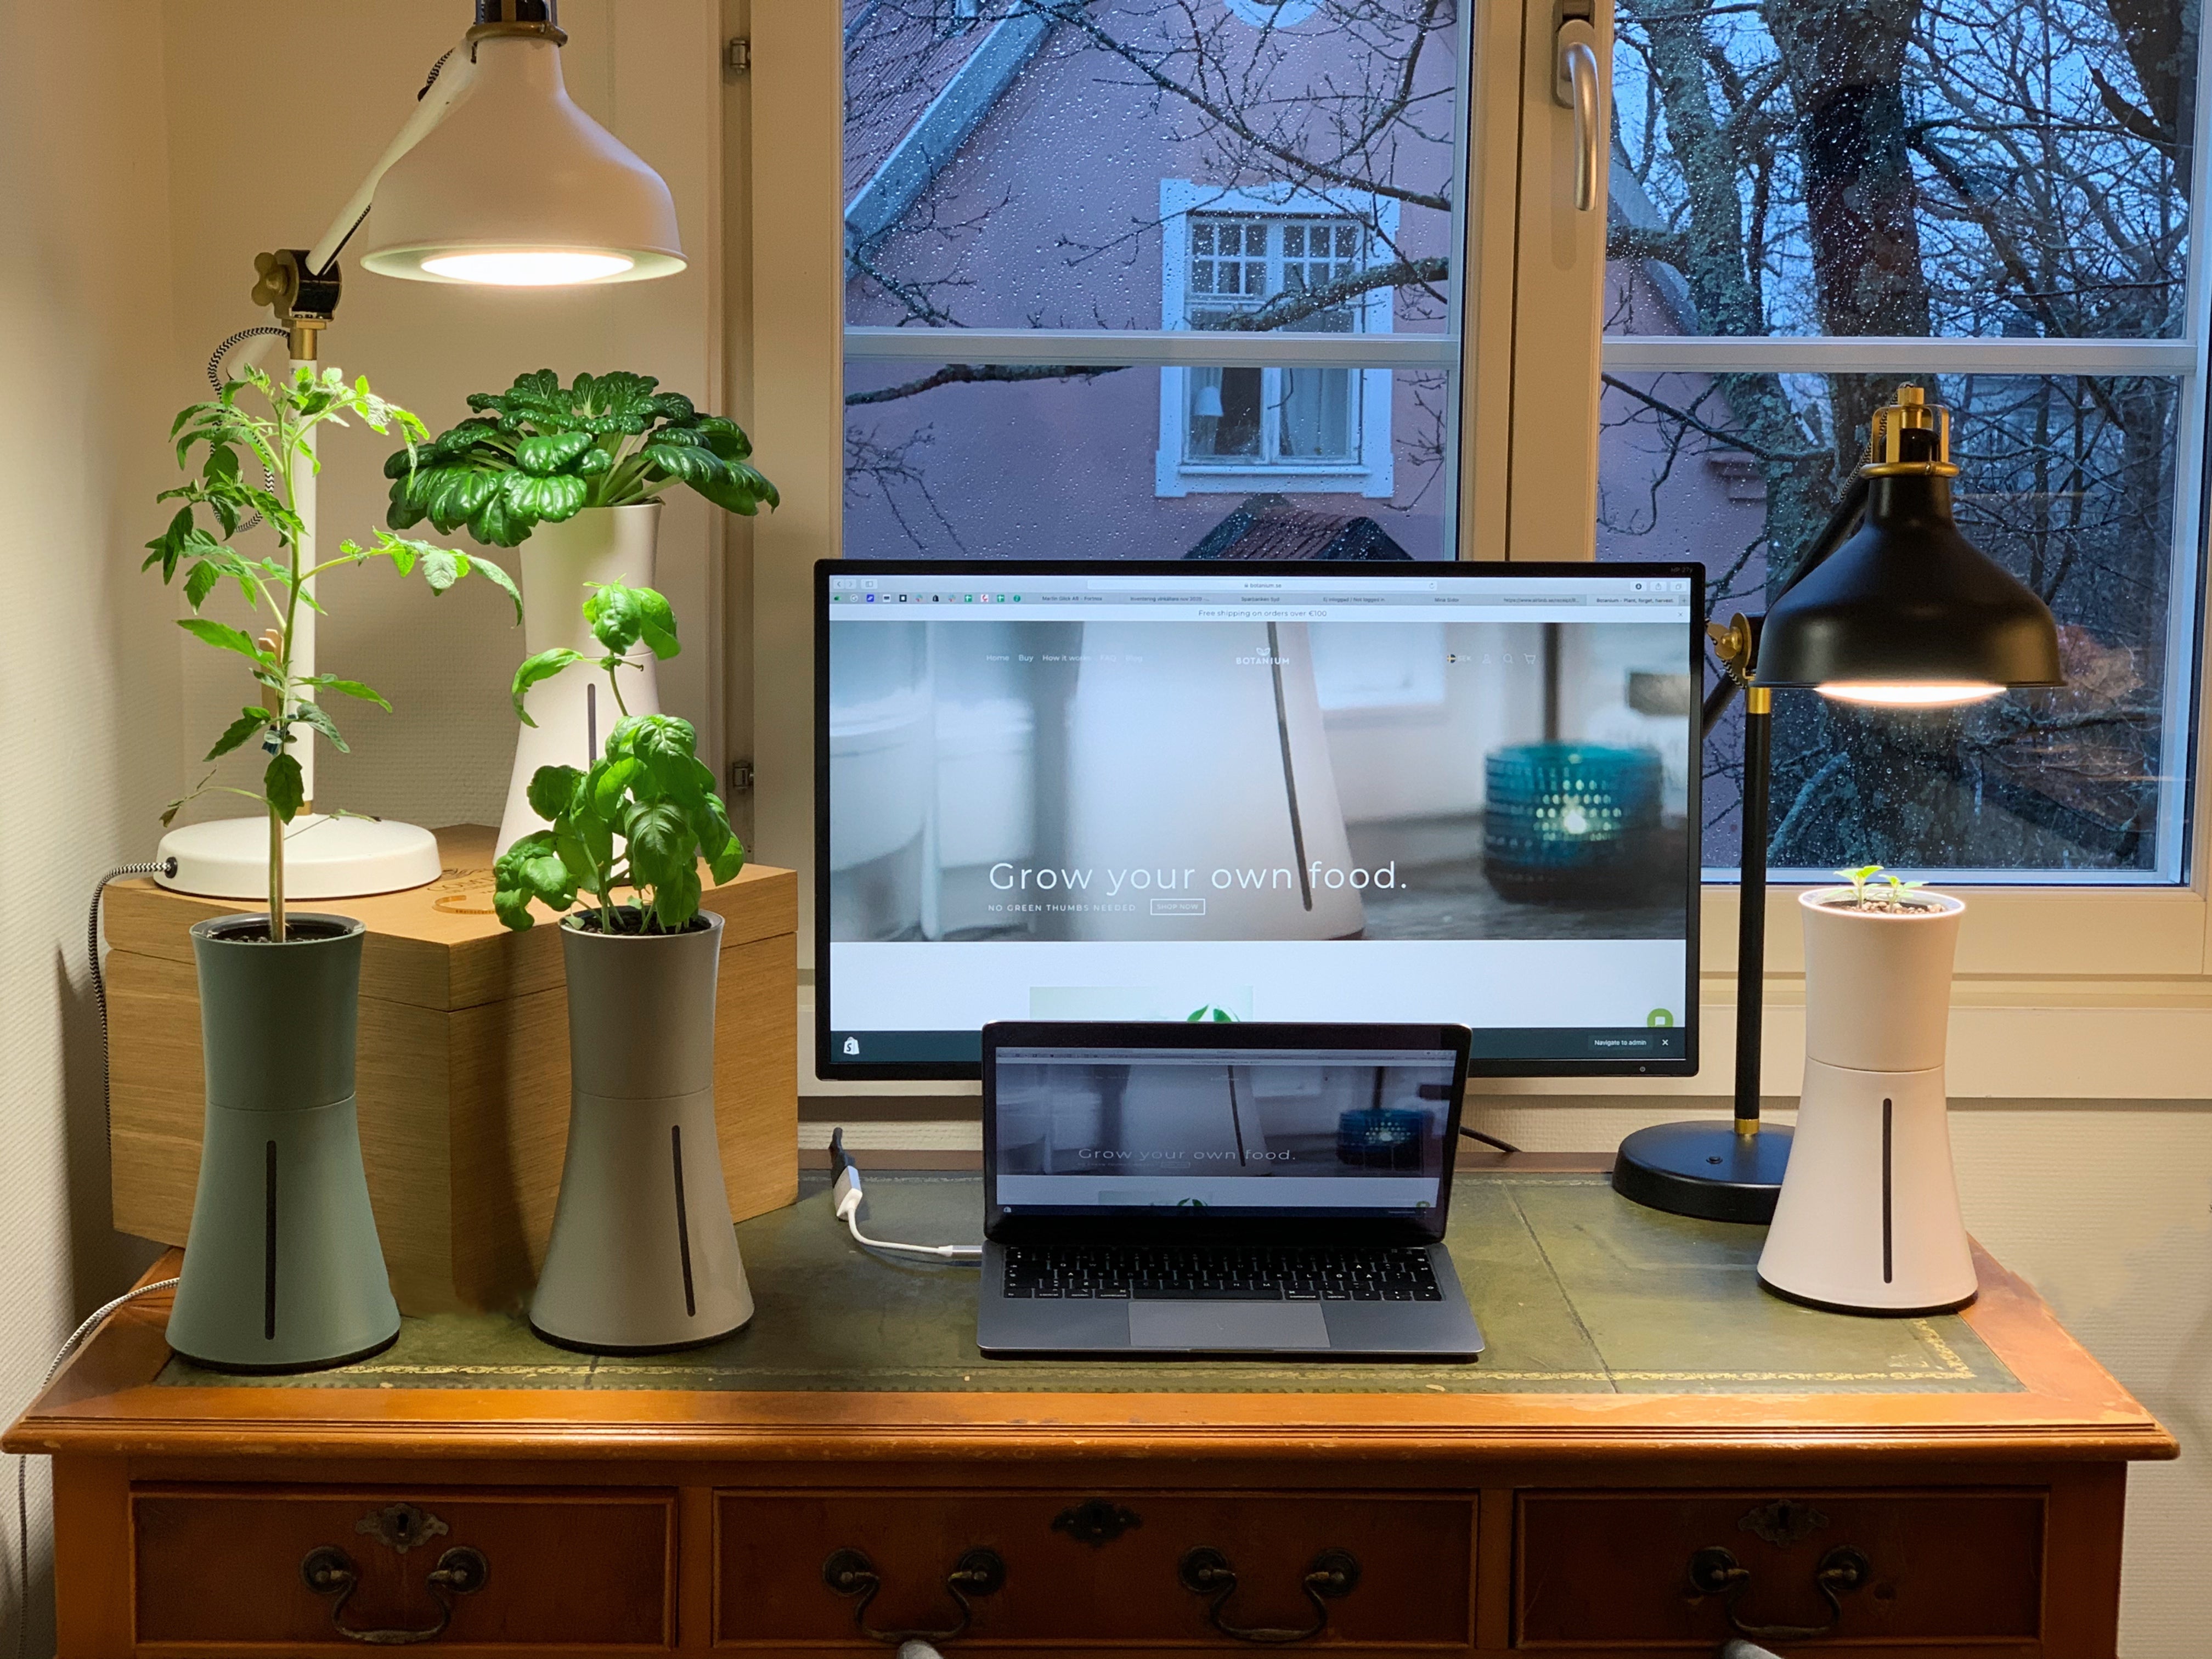 Plants boost productivity when working from home 🌿